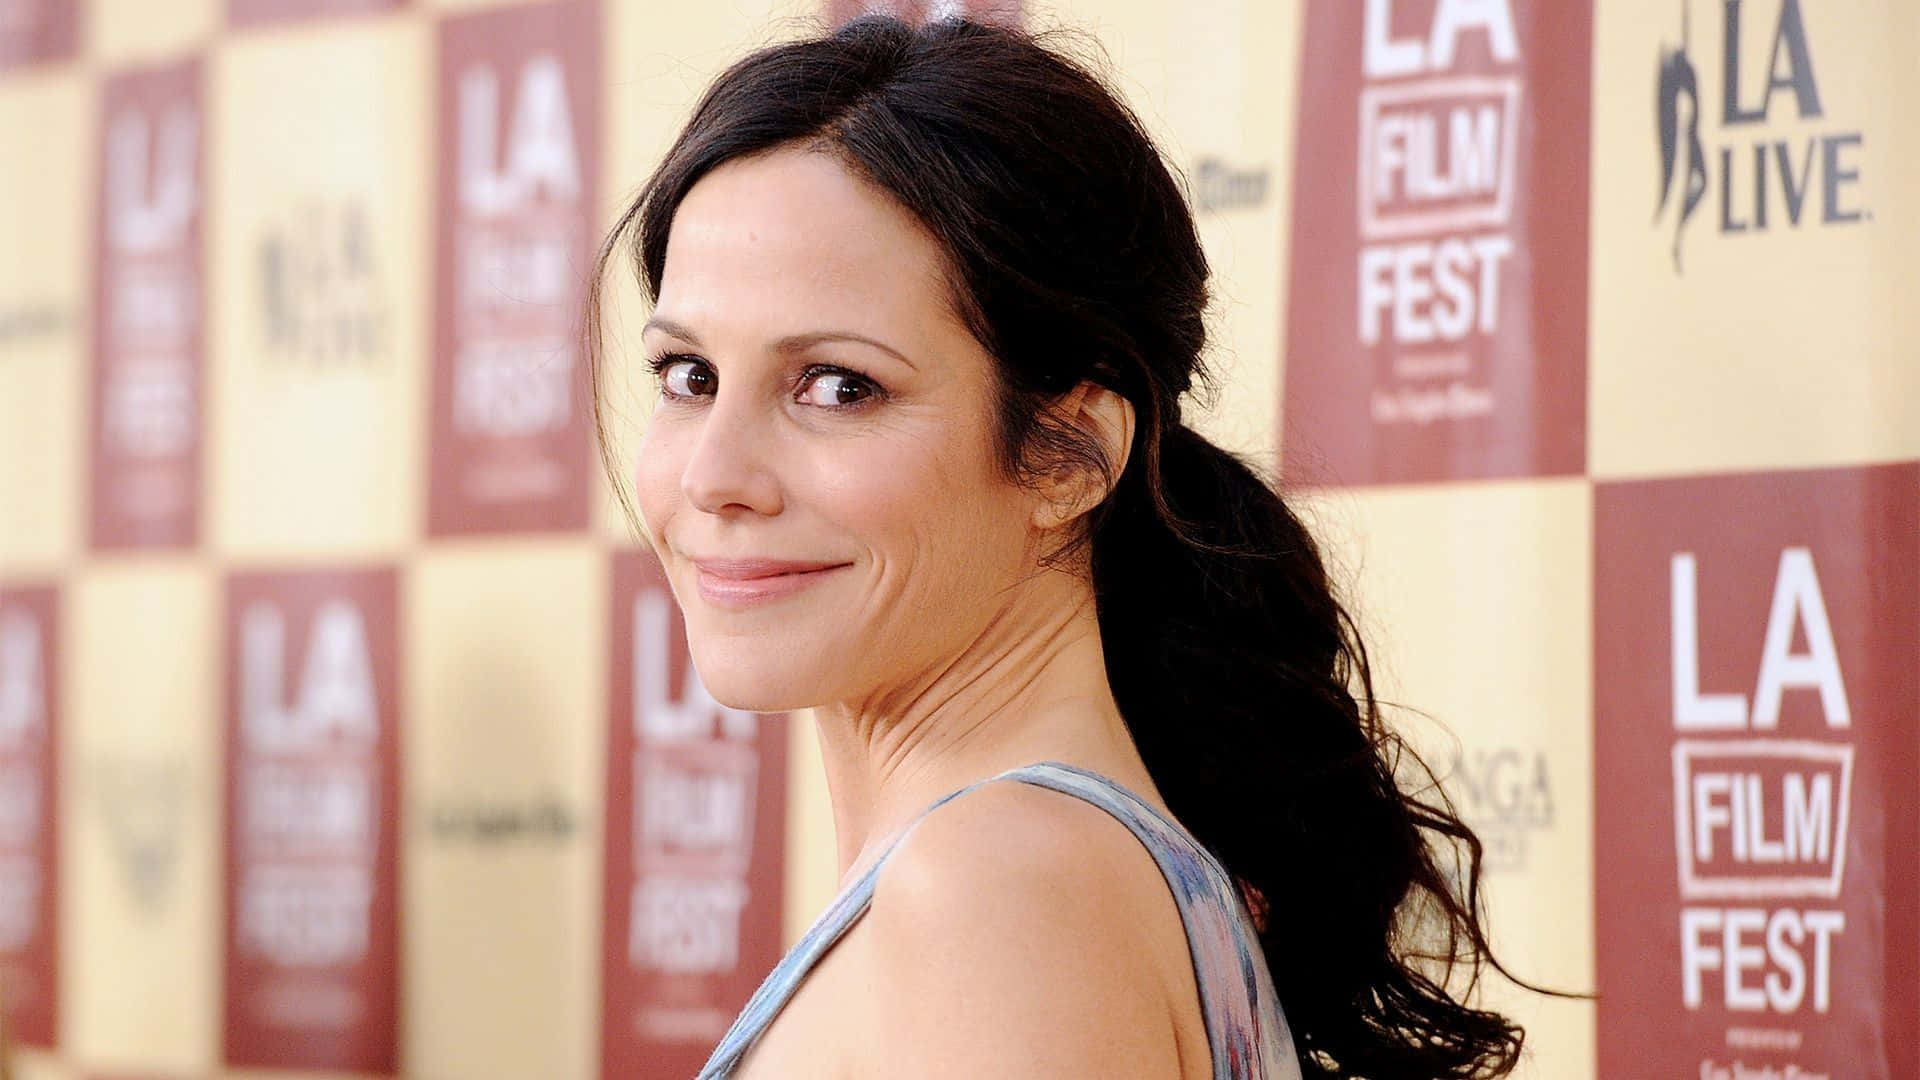 Mary-Louise Parker stunning pose in a black dress Wallpaper